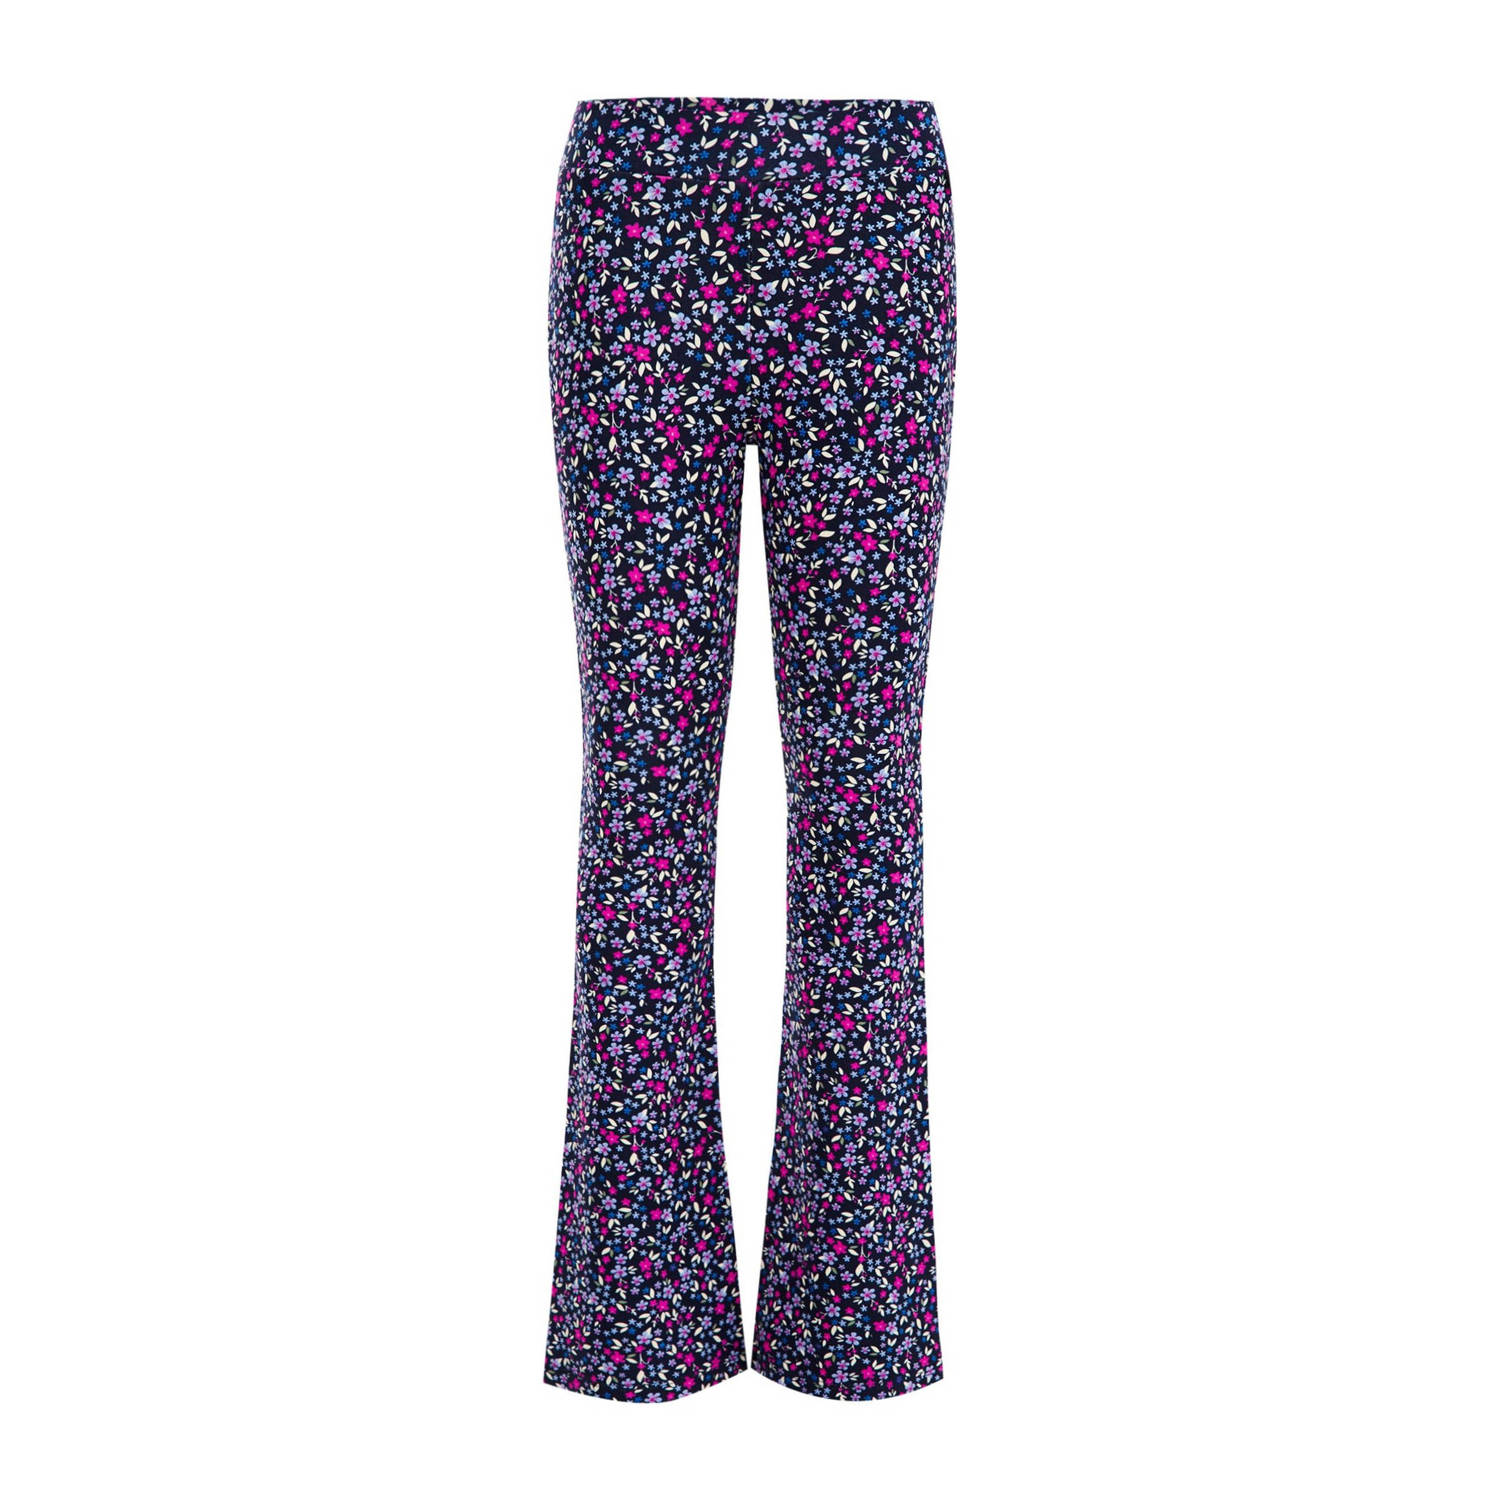 WE Fashion flared broek met all over print donkerblauw roze paars